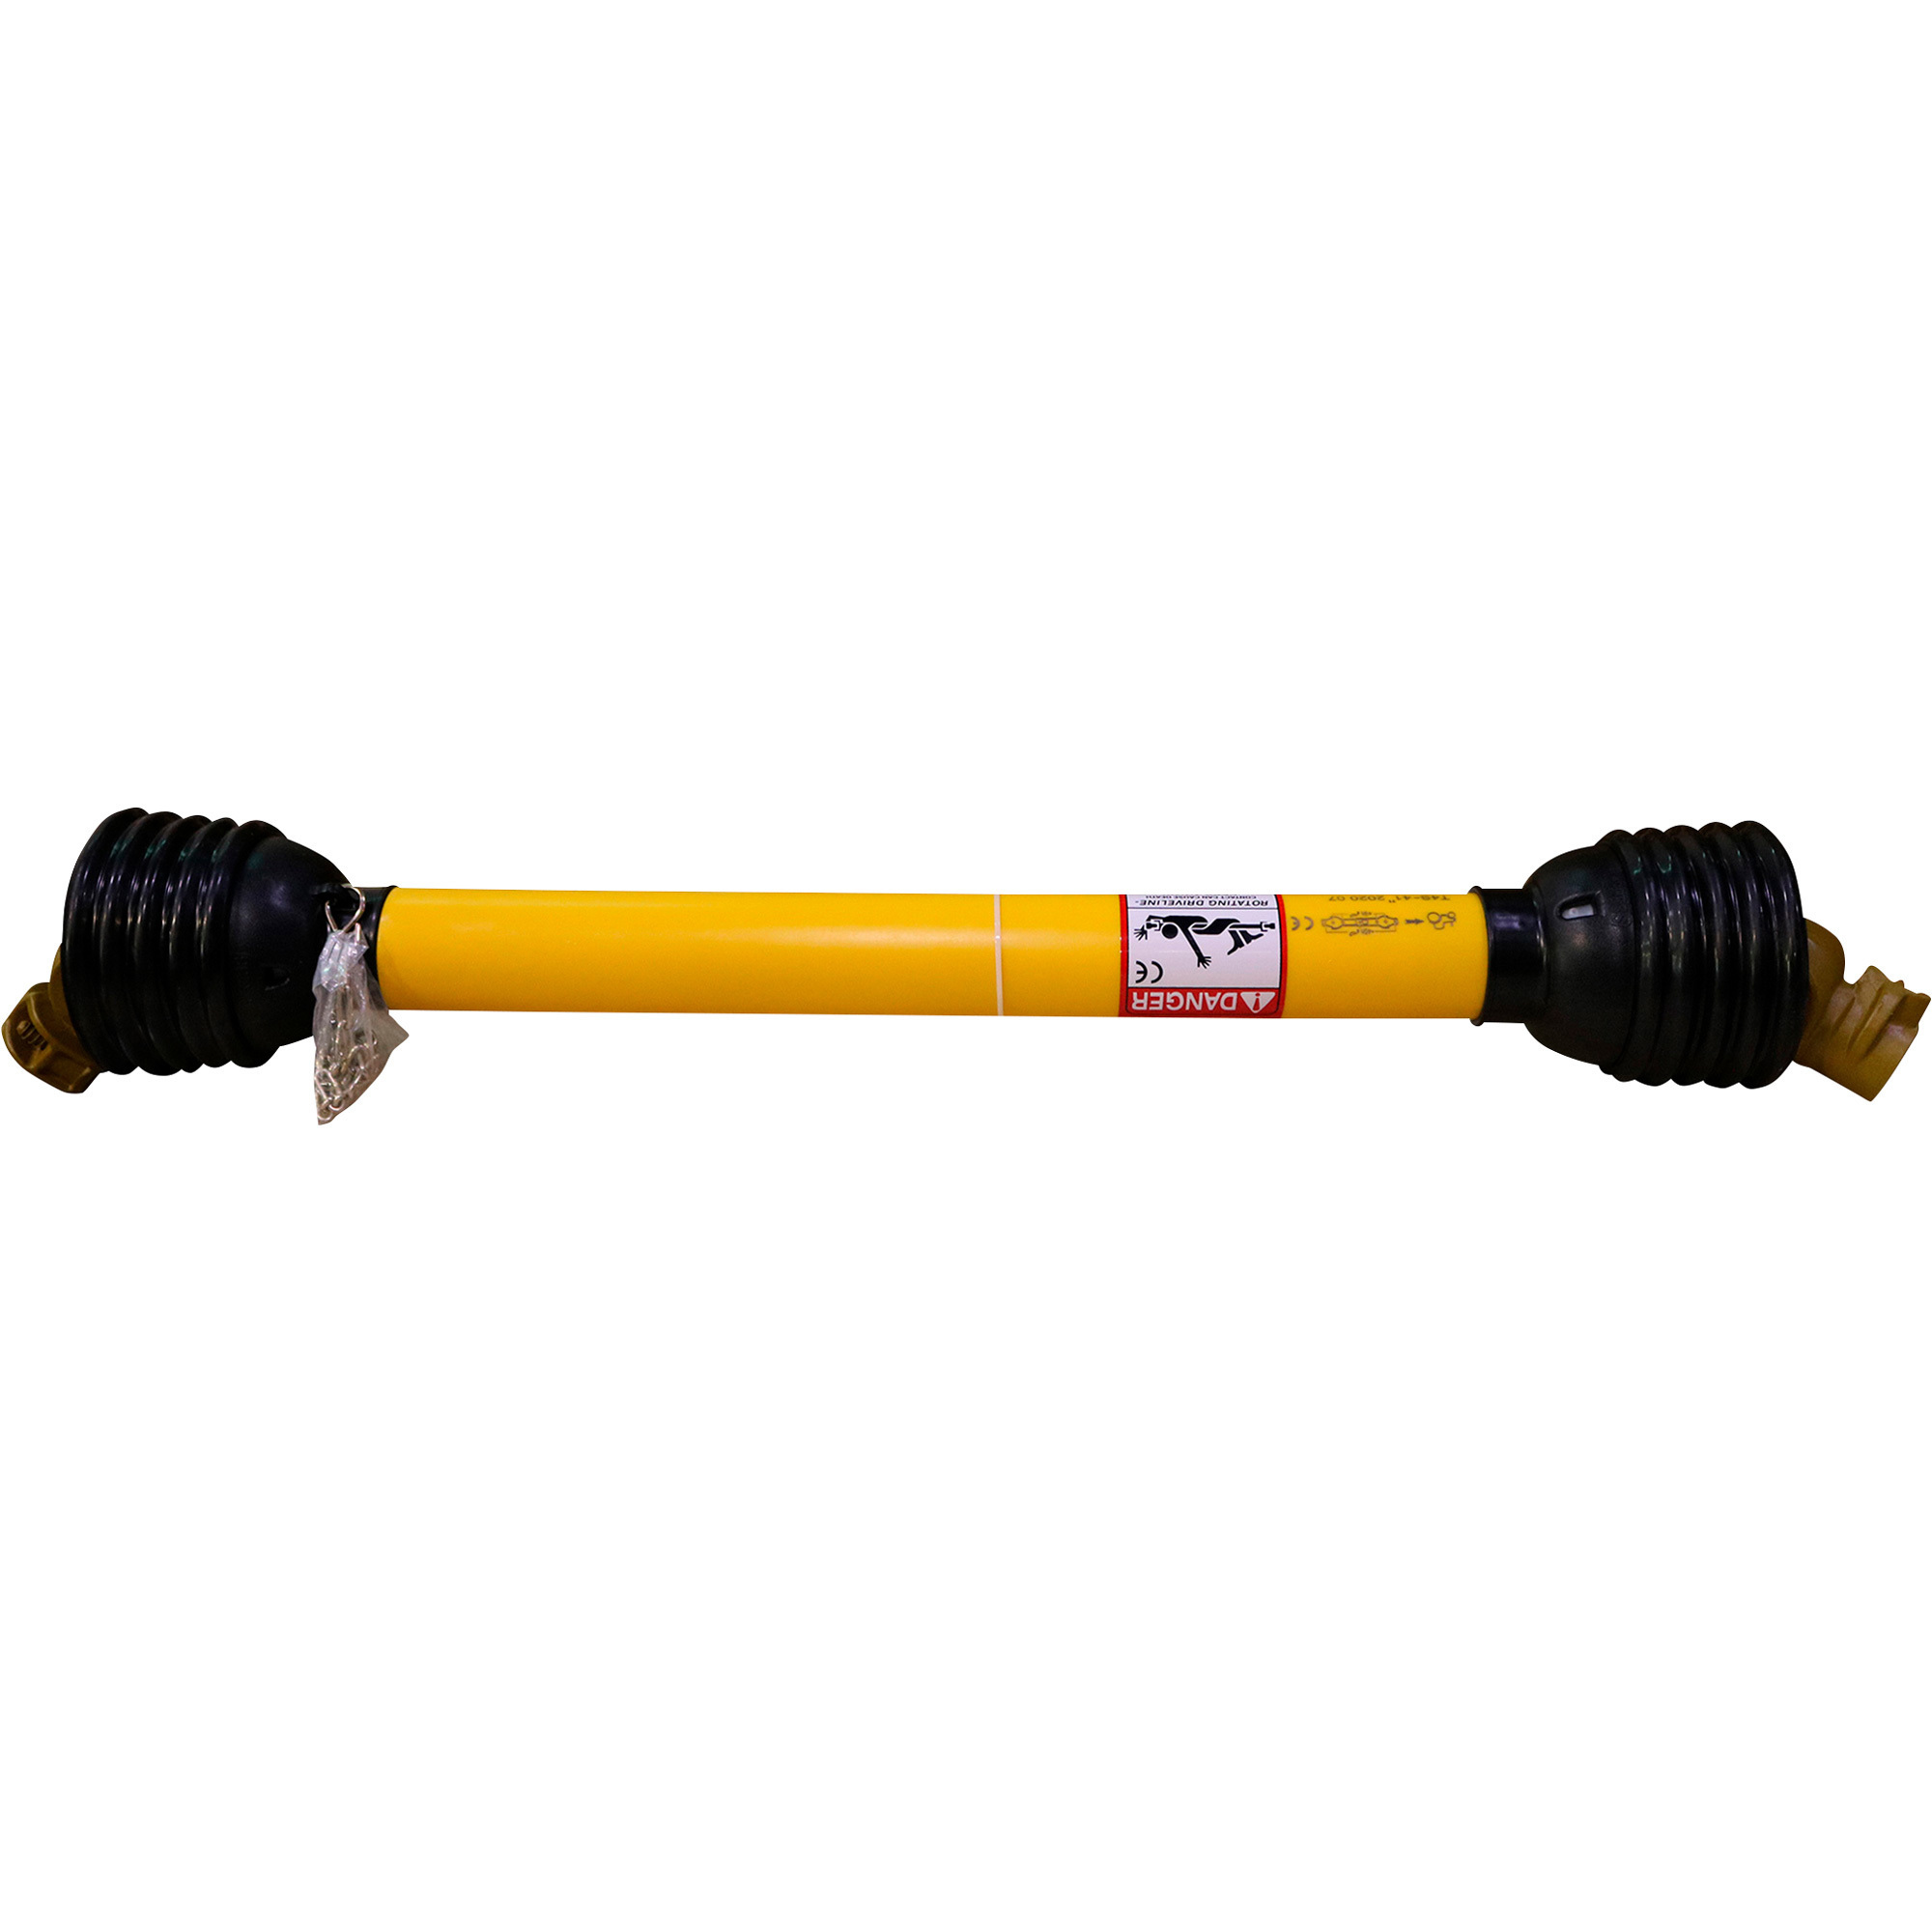 Braber Equipment General-Purpose PTO Shaft Assembly, 36Inch Collapsed Length, Model 69.885.005